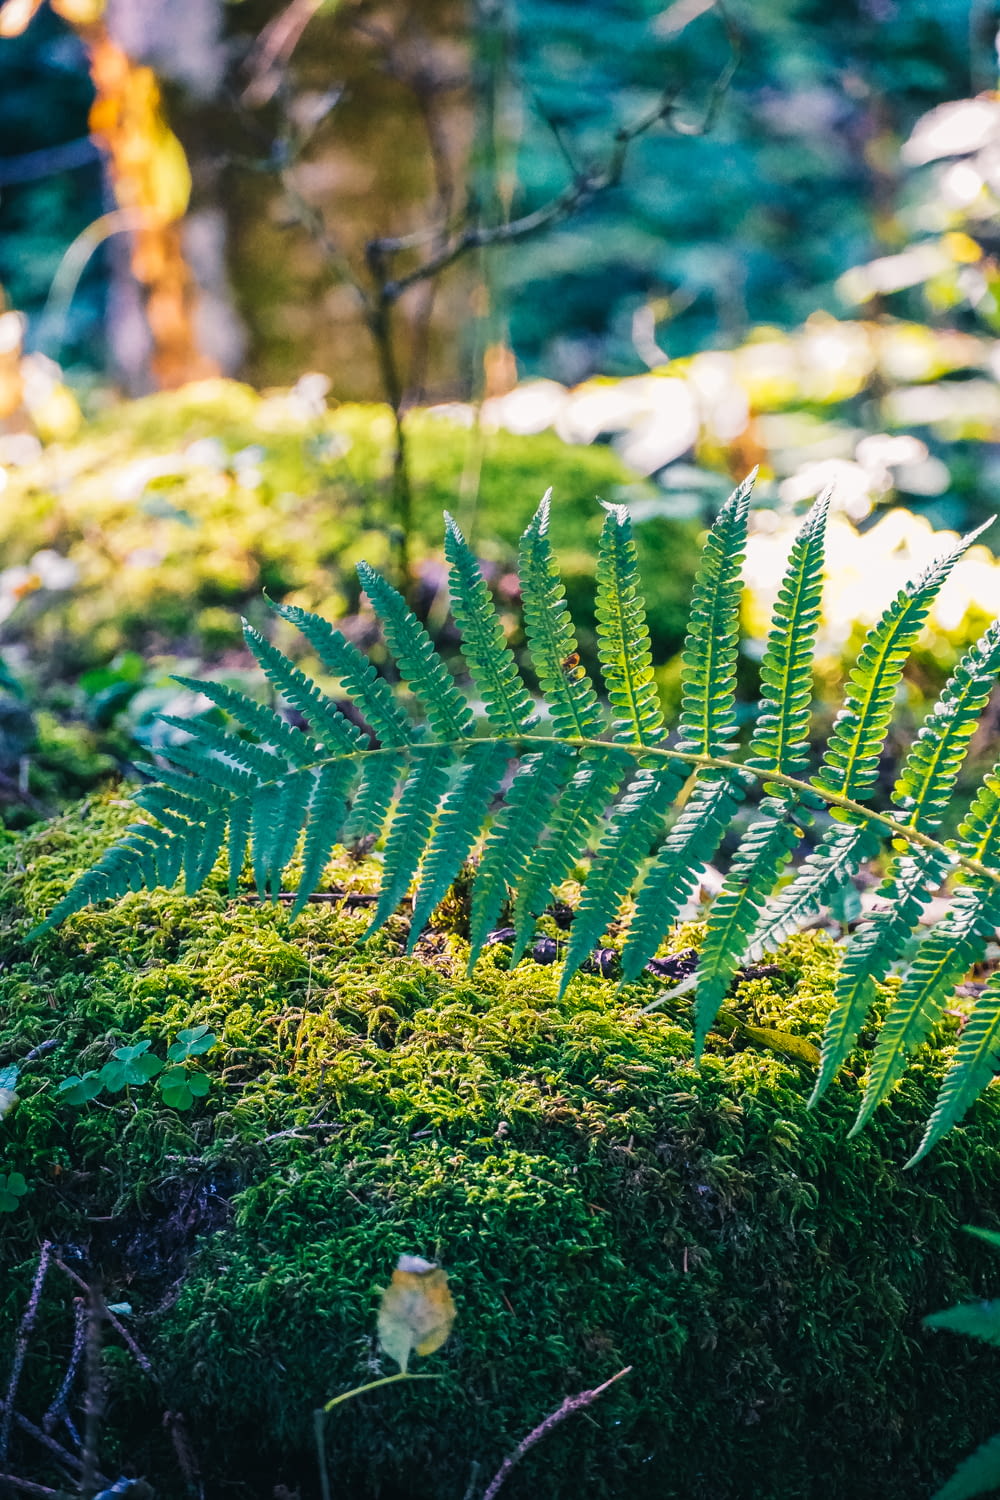 a fern is growing on a mossy surface